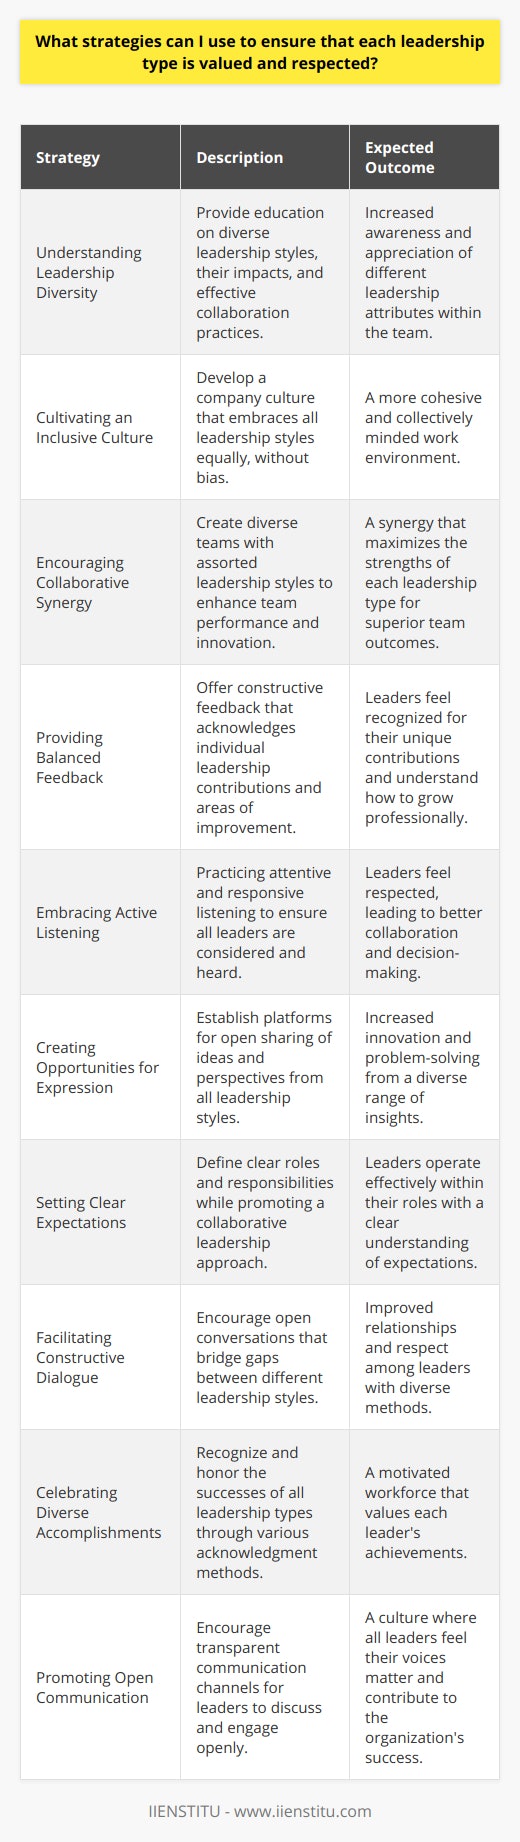 In contemporary organizational environments, the diversity of leadership styles is not just inevitable but also essential for the richness it brings to decision-making, problem-solving, and team dynamics. Valuing and respecting each leadership type is a strategic imperative that can yield enhanced team performance, promote innovation, and foster a harmonious work environment. Here are some strategies to ensure that every leadership style is appreciated and honored.**1. Understanding Leadership Diversity**First and foremost, for any strategy to be effective, there must be an in-depth understanding of the various leadership styles and their unique attributes. This includes familiarization with transformational, transactional, servant, autocratic, democratic, laissez-faire leaders, and more. An organization or leadership development entity like IIENSTITU could offer workshops and training sessions to educate teams on the different leadership styles, their potential impact on group dynamics, and the common pitfalls each style might encounter.**2. Cultivating an Inclusive Culture**An inclusive environment is one in which each leader, regardless of their style, feels valued. This is fostered through organizational culture and norms that embrace diversity in thought and approach. To do this, organizations can establish policies and practices that favor no single leadership style over others but instead highlight the value of each in different situations and contexts.**3. Encouraging Collaborative Synergy**Encouraging collaboration among leaders with different styles can harness the collective strength of varying perspectives. By forming diverse leadership teams for projects or strategic initiatives, organizations can capitalize on the unique advantage each style brings to the table, fostering a sense of interdependence and respect.**4. Providing Balanced Feedback**Open and honest feedback is crucial in recognizing the individual contributions of each leadership type. Constructive feedback should highlight not only areas for improvement but also celebrate the unique strengths and successes that each leader brings to their role. This requires a performance review system that is nuanced and personalized.**5. Embracing Active Listening**Active listening involves fully concentrating, understanding, responding, and then remembering what is being said. This practice ensures that leaders of all types are given due consideration, and their ideas and concerns are taken seriously, thus affirming their value to the organization.**6. Creating Opportunities for Expression**Establishing forums or platforms where different leadership styles can openly share their perspectives is essential. This could be in the form of roundtable discussions, open-door policies, or regular check-ins that provide the space and opportunity for leaders with different styles to voice their thoughts without judgment.**7. Setting Clear Expectations**Leaders of all kinds function best when there is clarity regarding expectations and boundaries. Organizations should articulate the scope and limitations inherent to different leadership roles, while also emphasizing the collaborative nature of leadership in the organization.**8. Facilitating Constructive Dialogue**Dialogue is a two-way street; it's not just about speaking but also engaging with what others say. Facilitating conversations between contrasting leadership types can lead to greater understanding, dispel stereotypes, and build mutual respect.**9. Celebrating Diverse Accomplishments**Organizations can acknowledge the achievements of various leadership types through award programs, public recognition, or even informal praise. Celebrating the wins of each leader not only boosts morale but also demonstrates the organization's commitment to valuing every leadership style.**10. Promoting Open Communication**A culture of open communication where leaders feel comfortable discussing issues, providing suggestions, and expressing concerns is vital. This goes hand in hand with active listening and constructive feedback to create an environment where all leaders, regardless of type, feel their input is valued.In conclusion, valuing and respecting the spectrum of leadership styles in an organization is a dynamic process that requires intentionality, commitment, and strategic implementation. By applying these strategies, organizations can leverage the unique strengths of each leadership type, fostering a culture of inclusion, respect, and collective success.